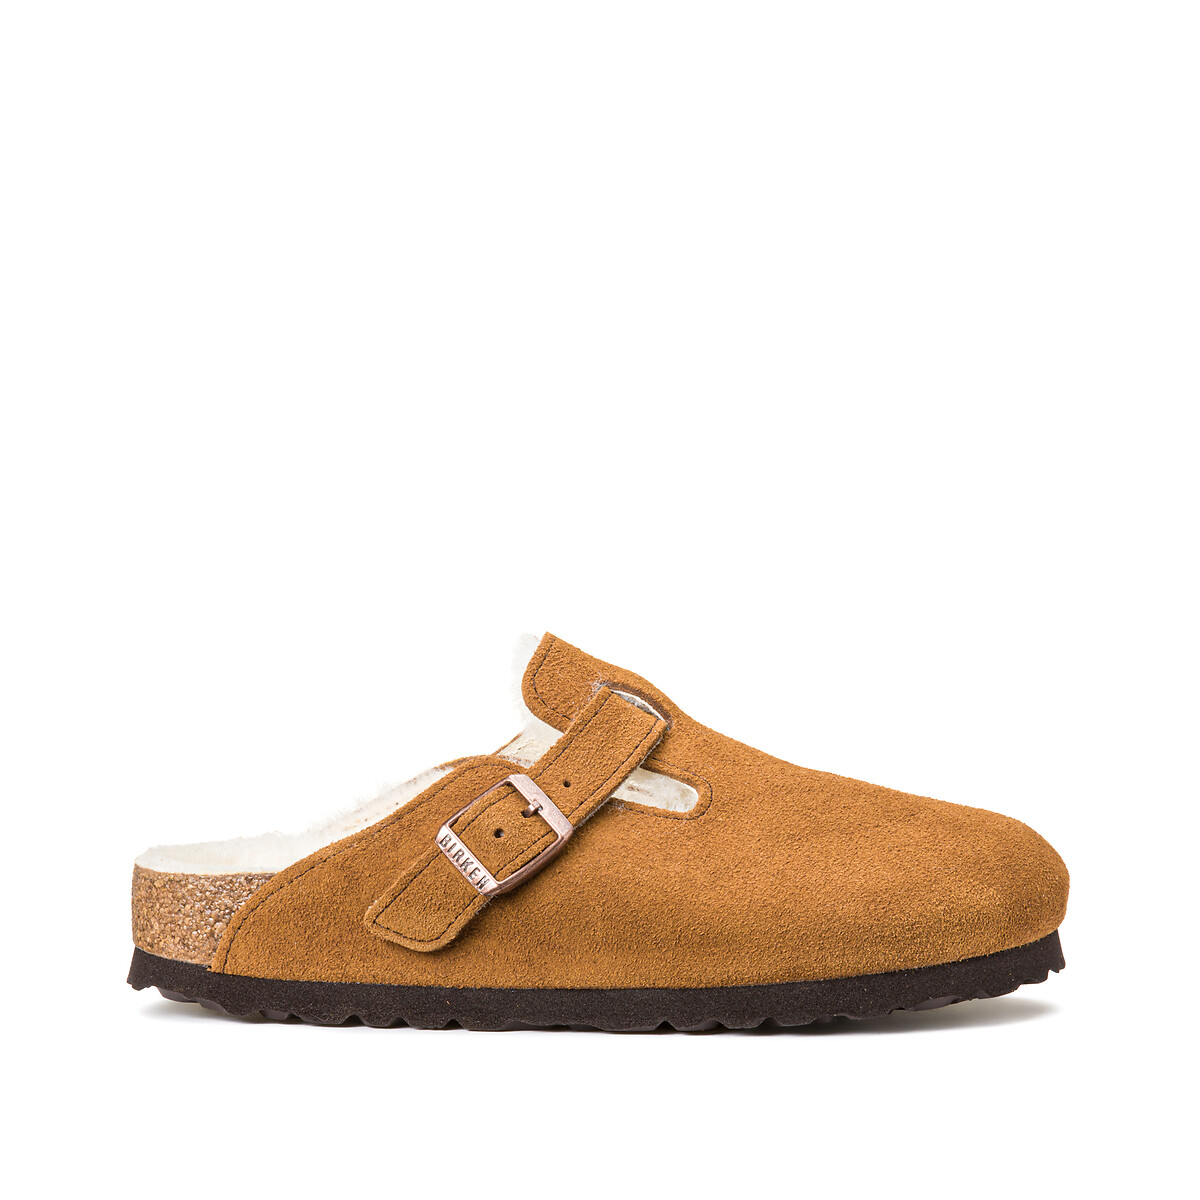 Image of Boston VL/Fell Clogs in Suede with Faux Fur Lining